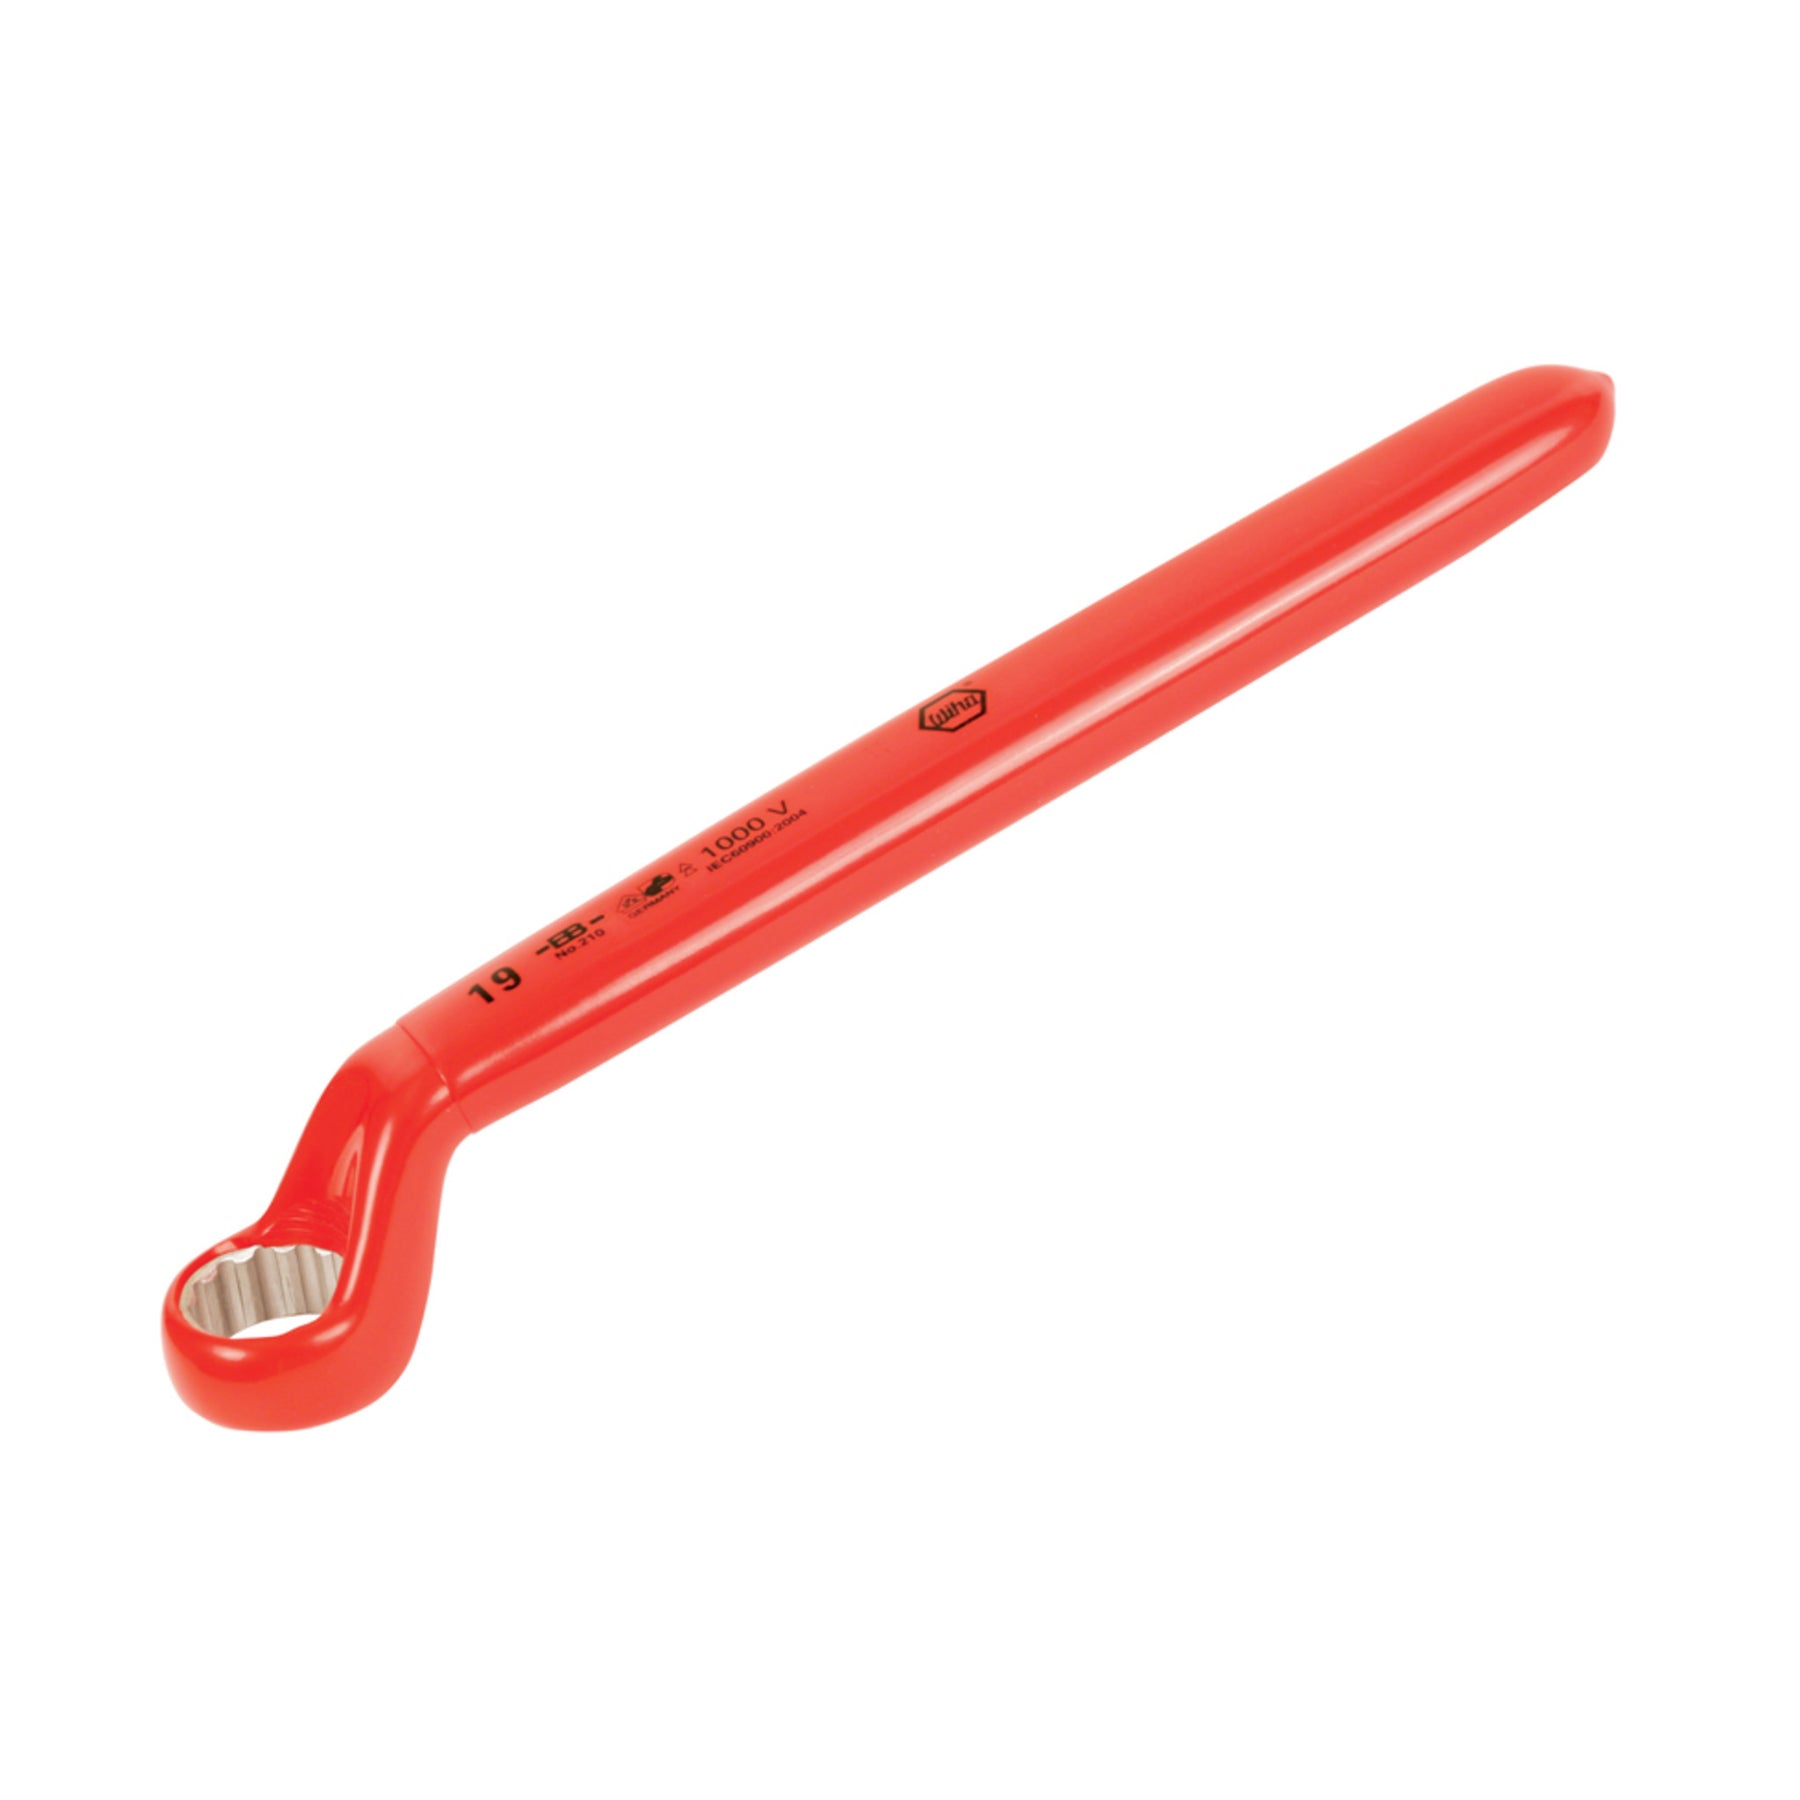 Insulated Deep Offset Wrench 3/4"